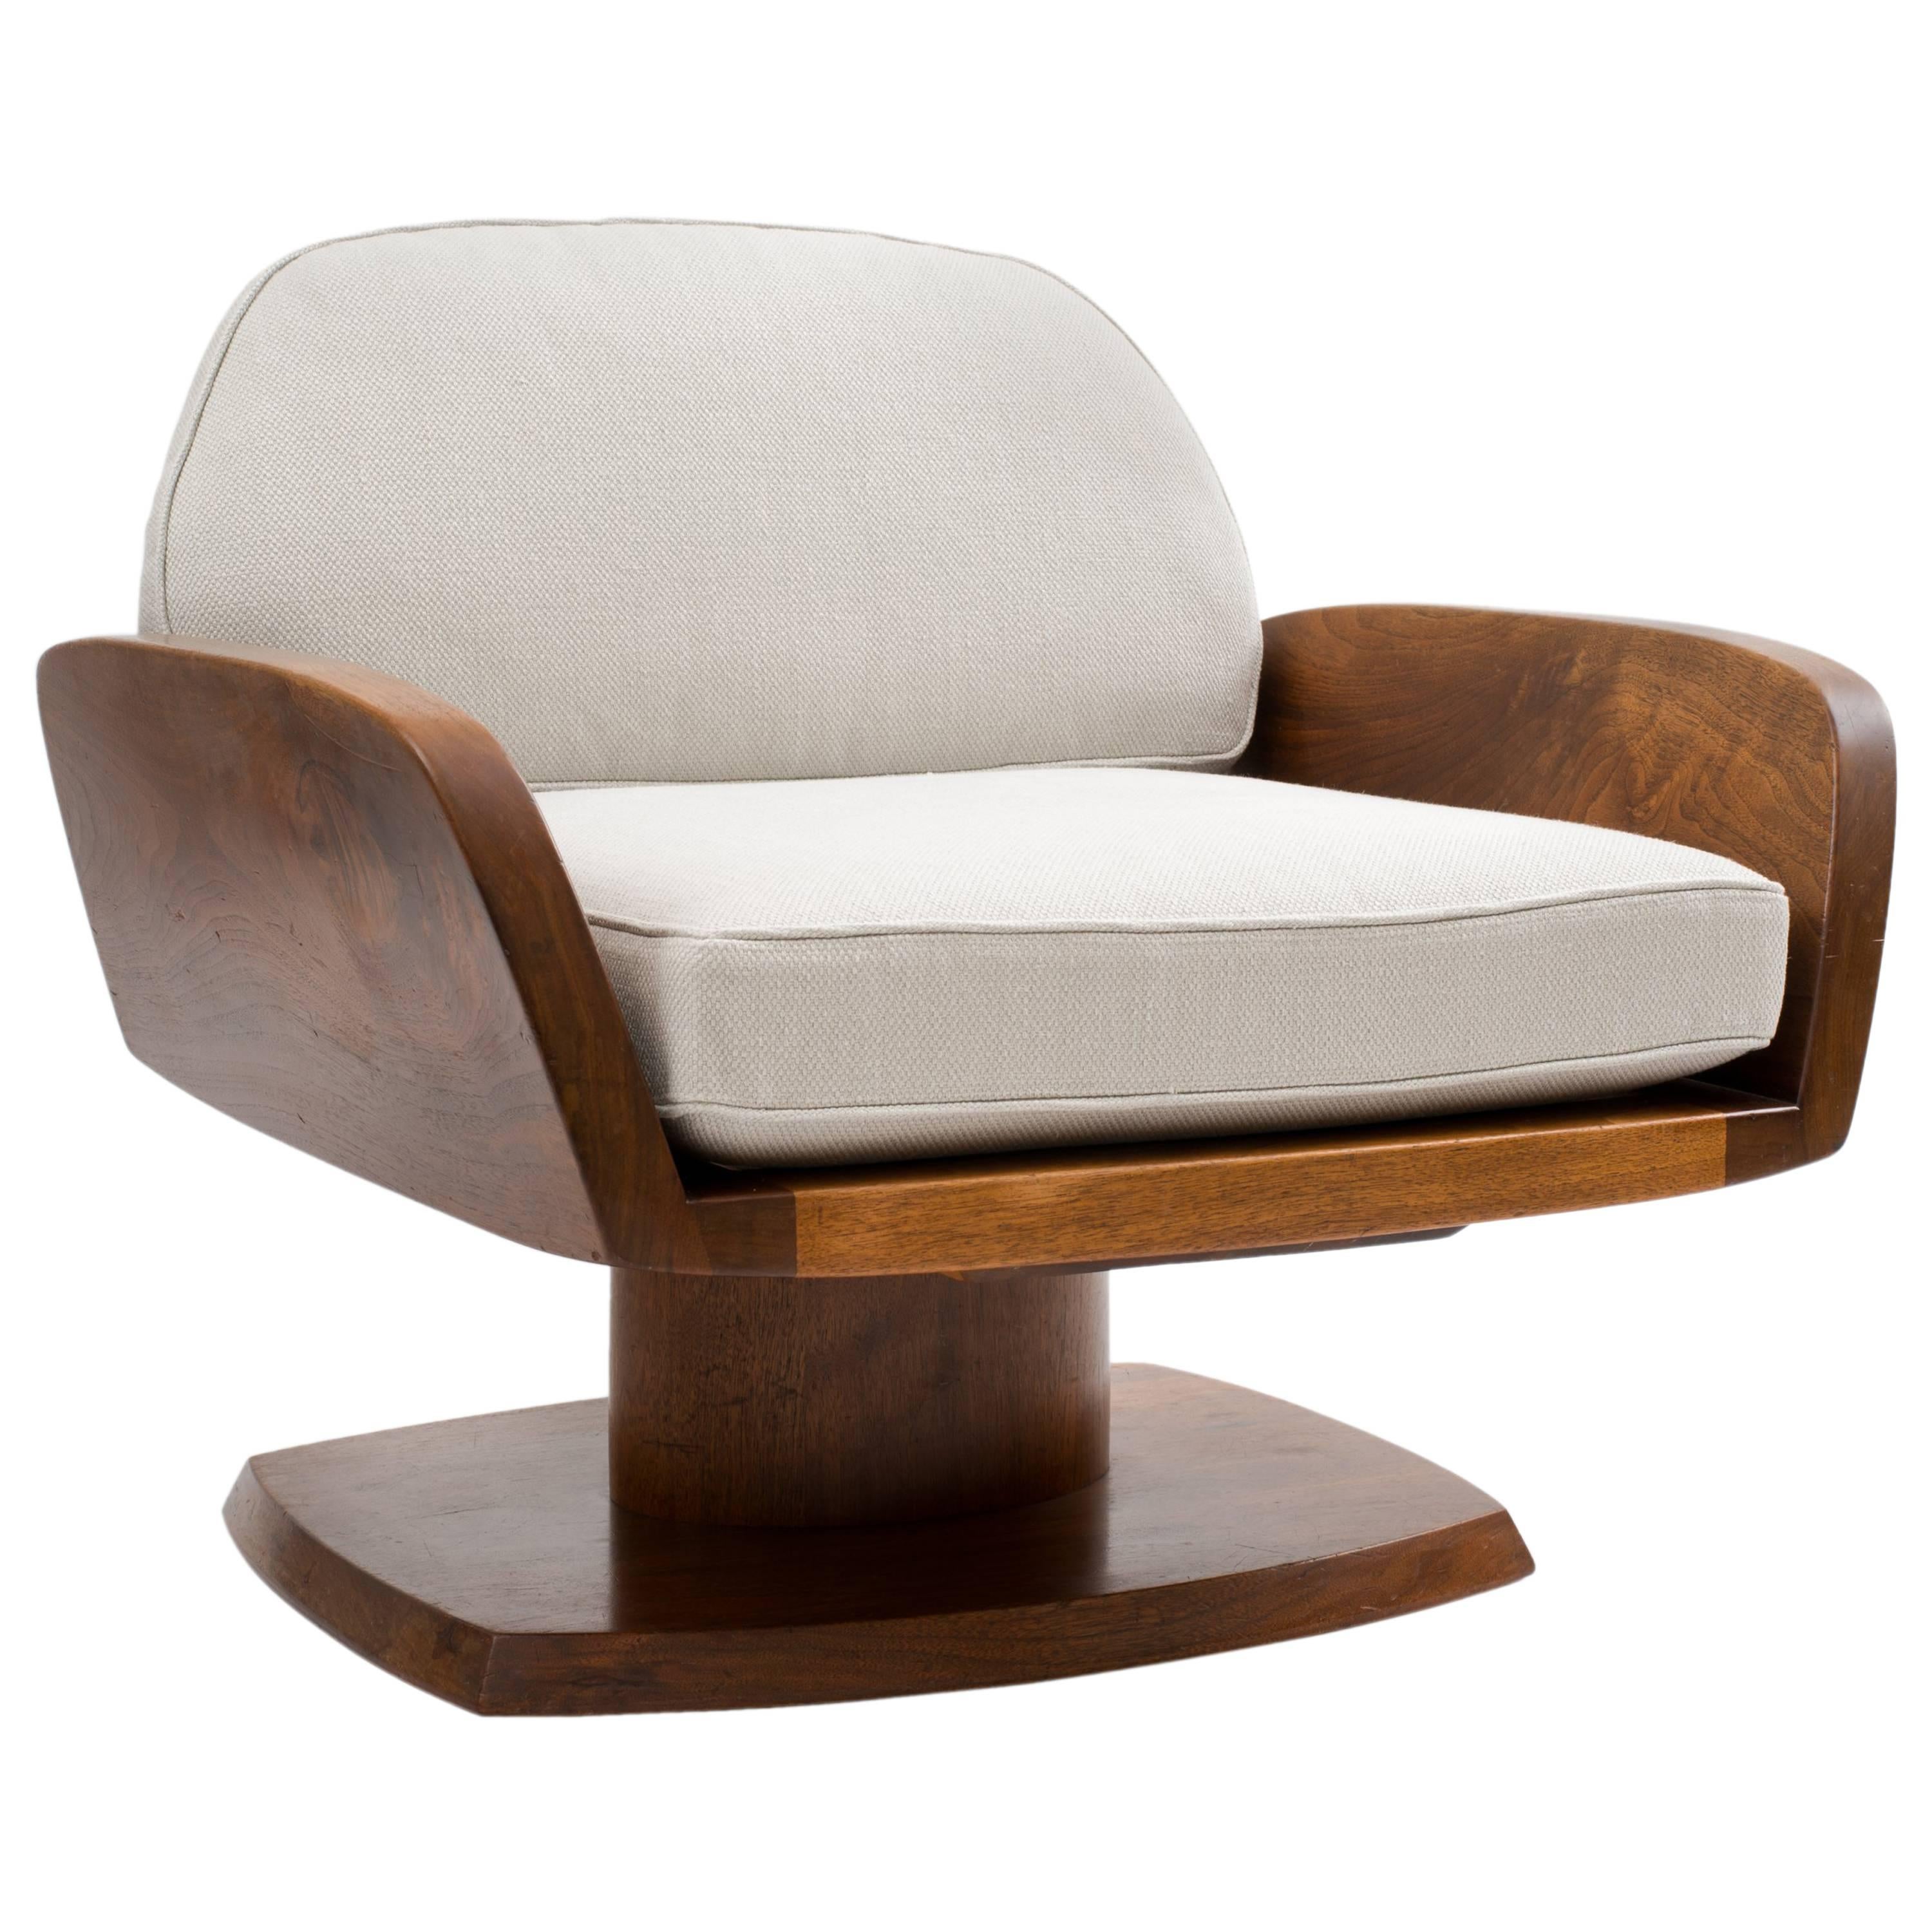 Robert Whitley American Studio Craft Movement Upholstered Lounge Chair, 1968